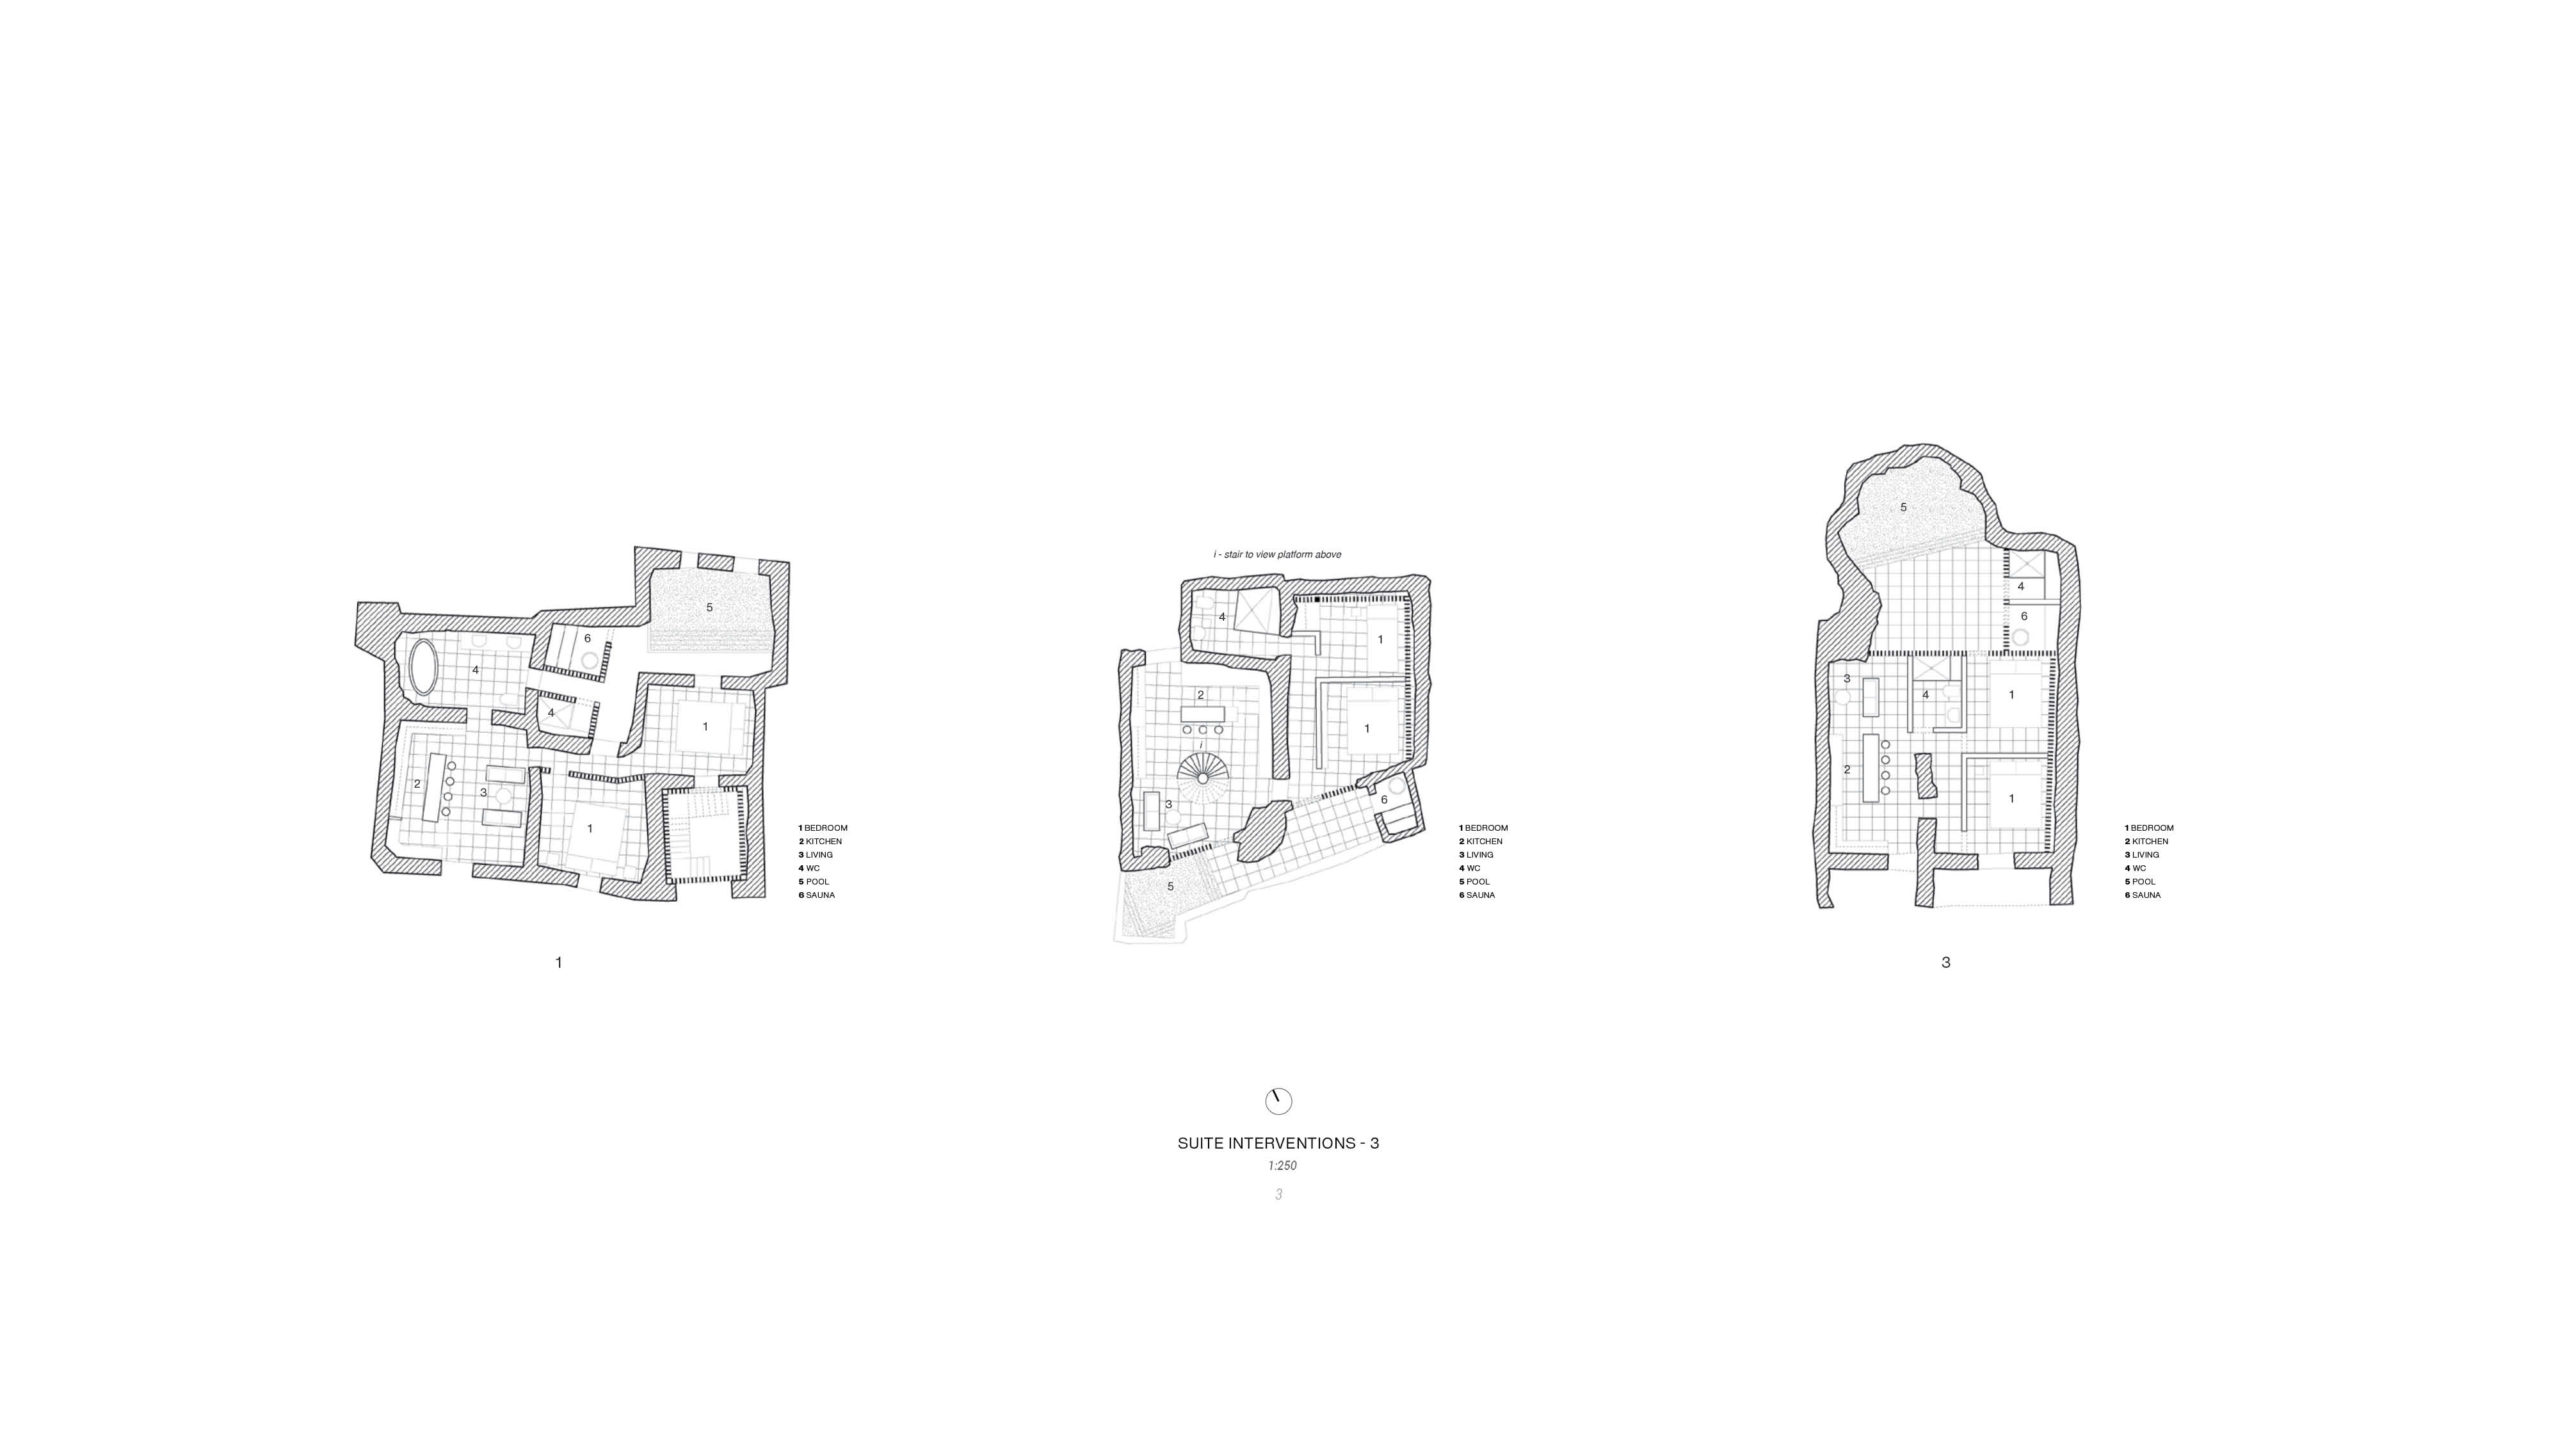 Unbuilt : TRACES - GHOST TOWN REFUGE, at Craco, Italy, by Claudio C. Araya, Yahya Abdullah 9